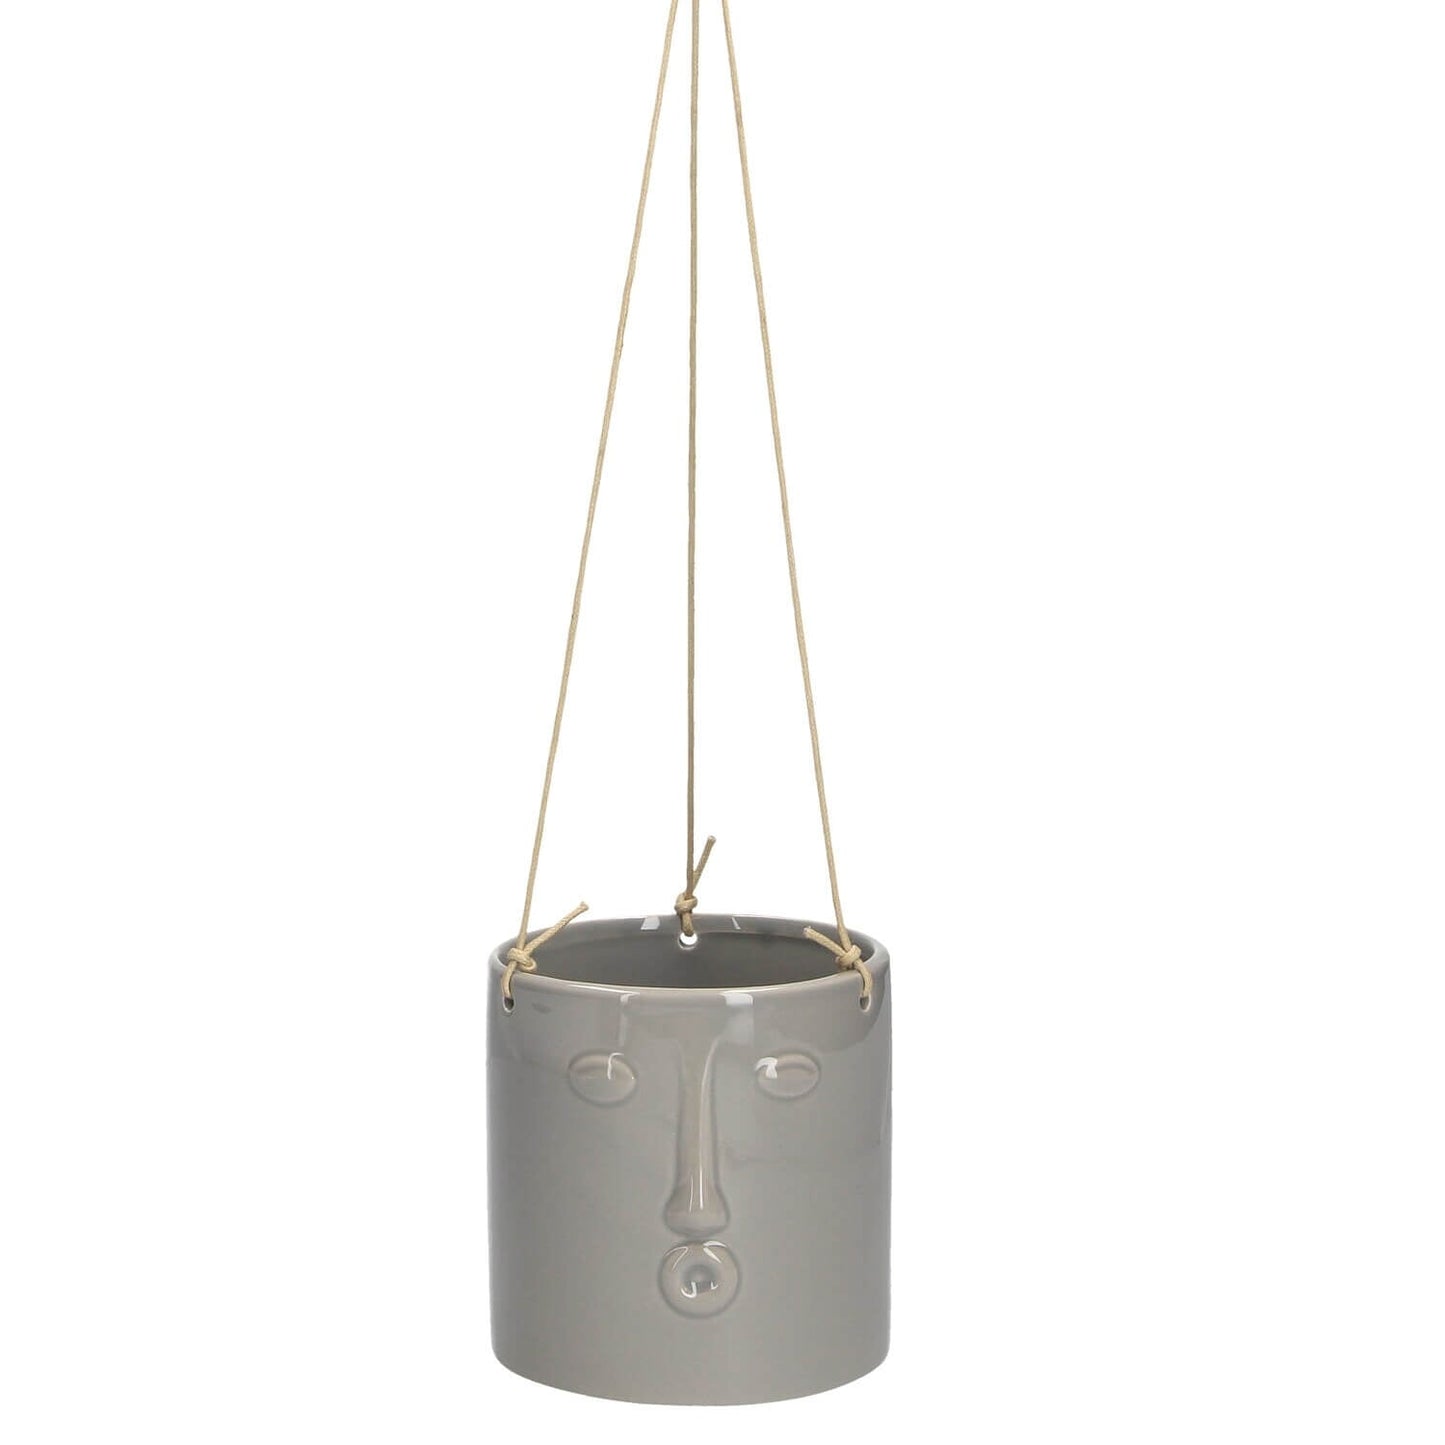 Hanging Ceramic Plant Pot with Face Living Silver Tree Home Grey Prettycleanshop